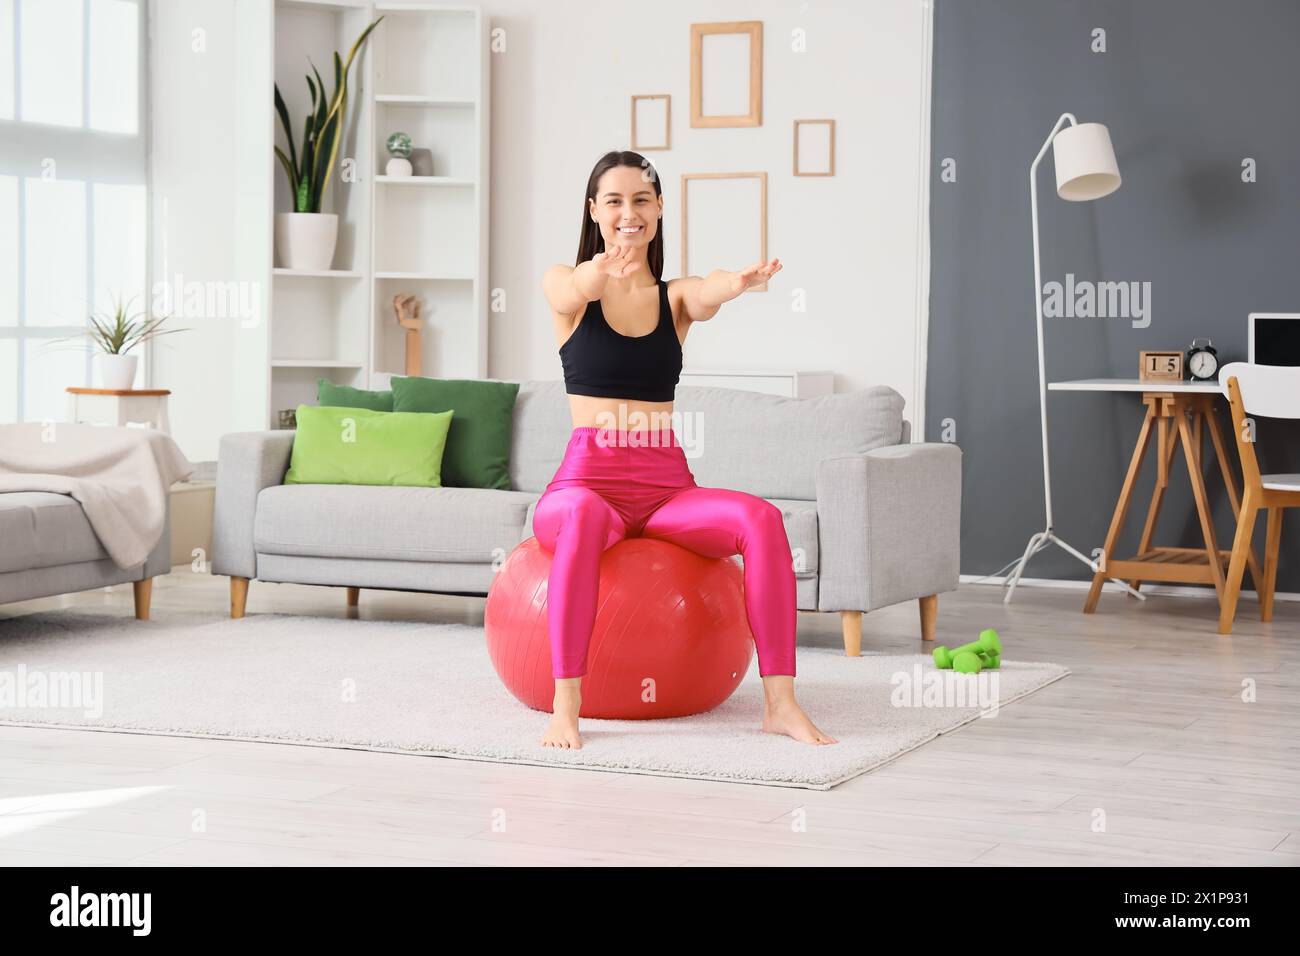 Sporty young woman exercising on fitness ball at home Stock Photo